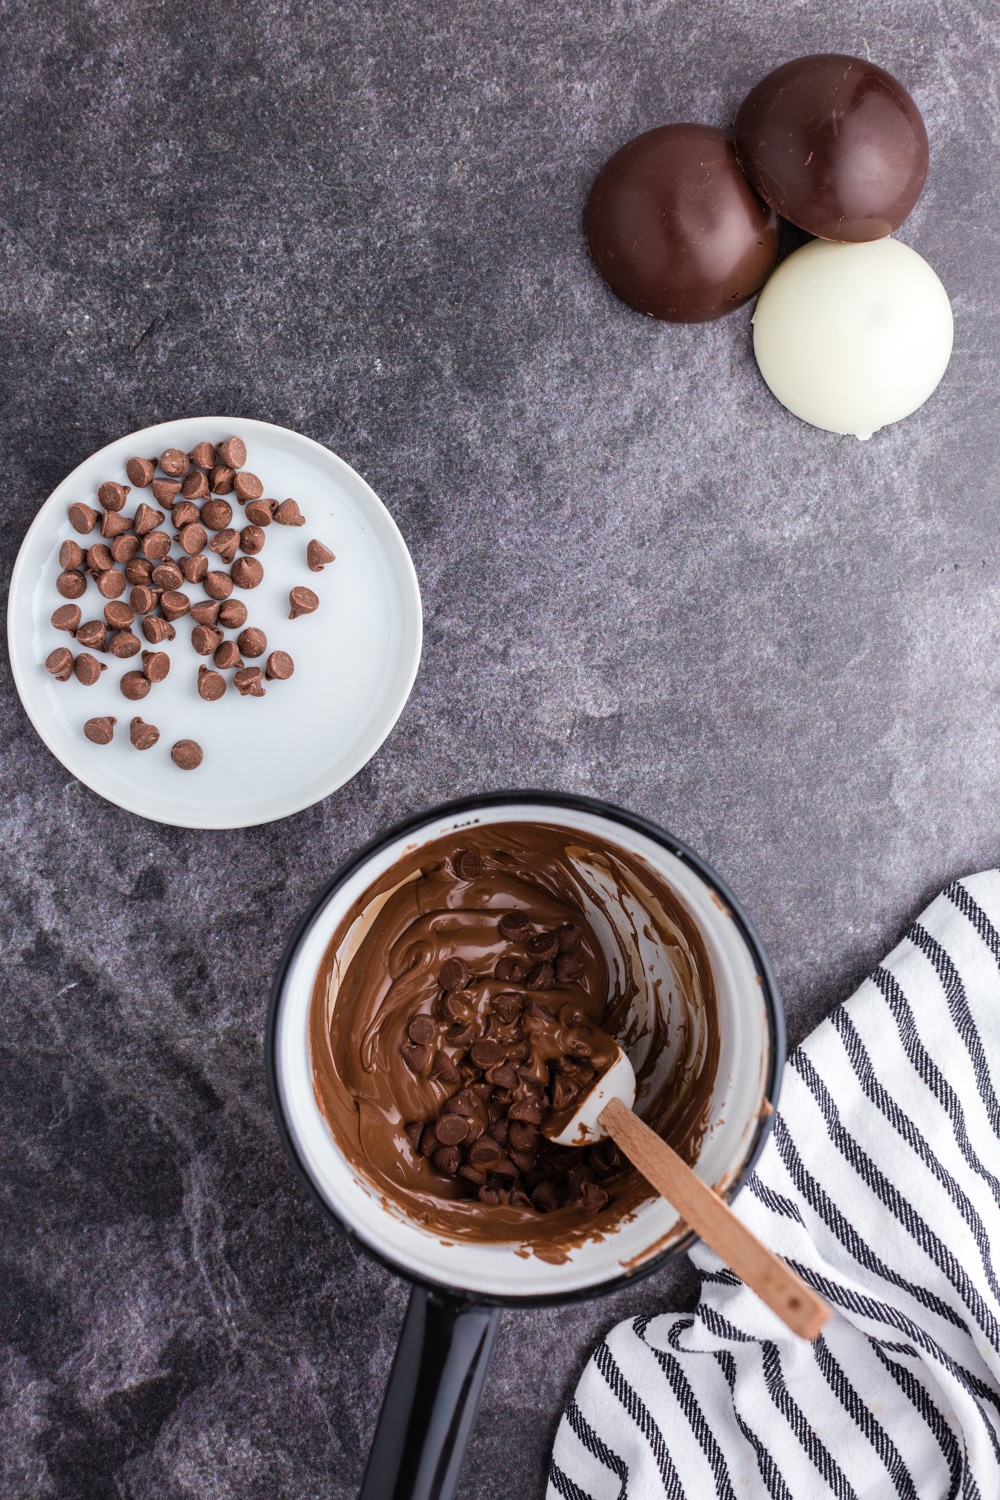 Bowl with melted chocolate chips and small spatula, shallow dish with remaining chocolate dips, striped linen, hot chocolate bomb halves, on a dark marble countertop.